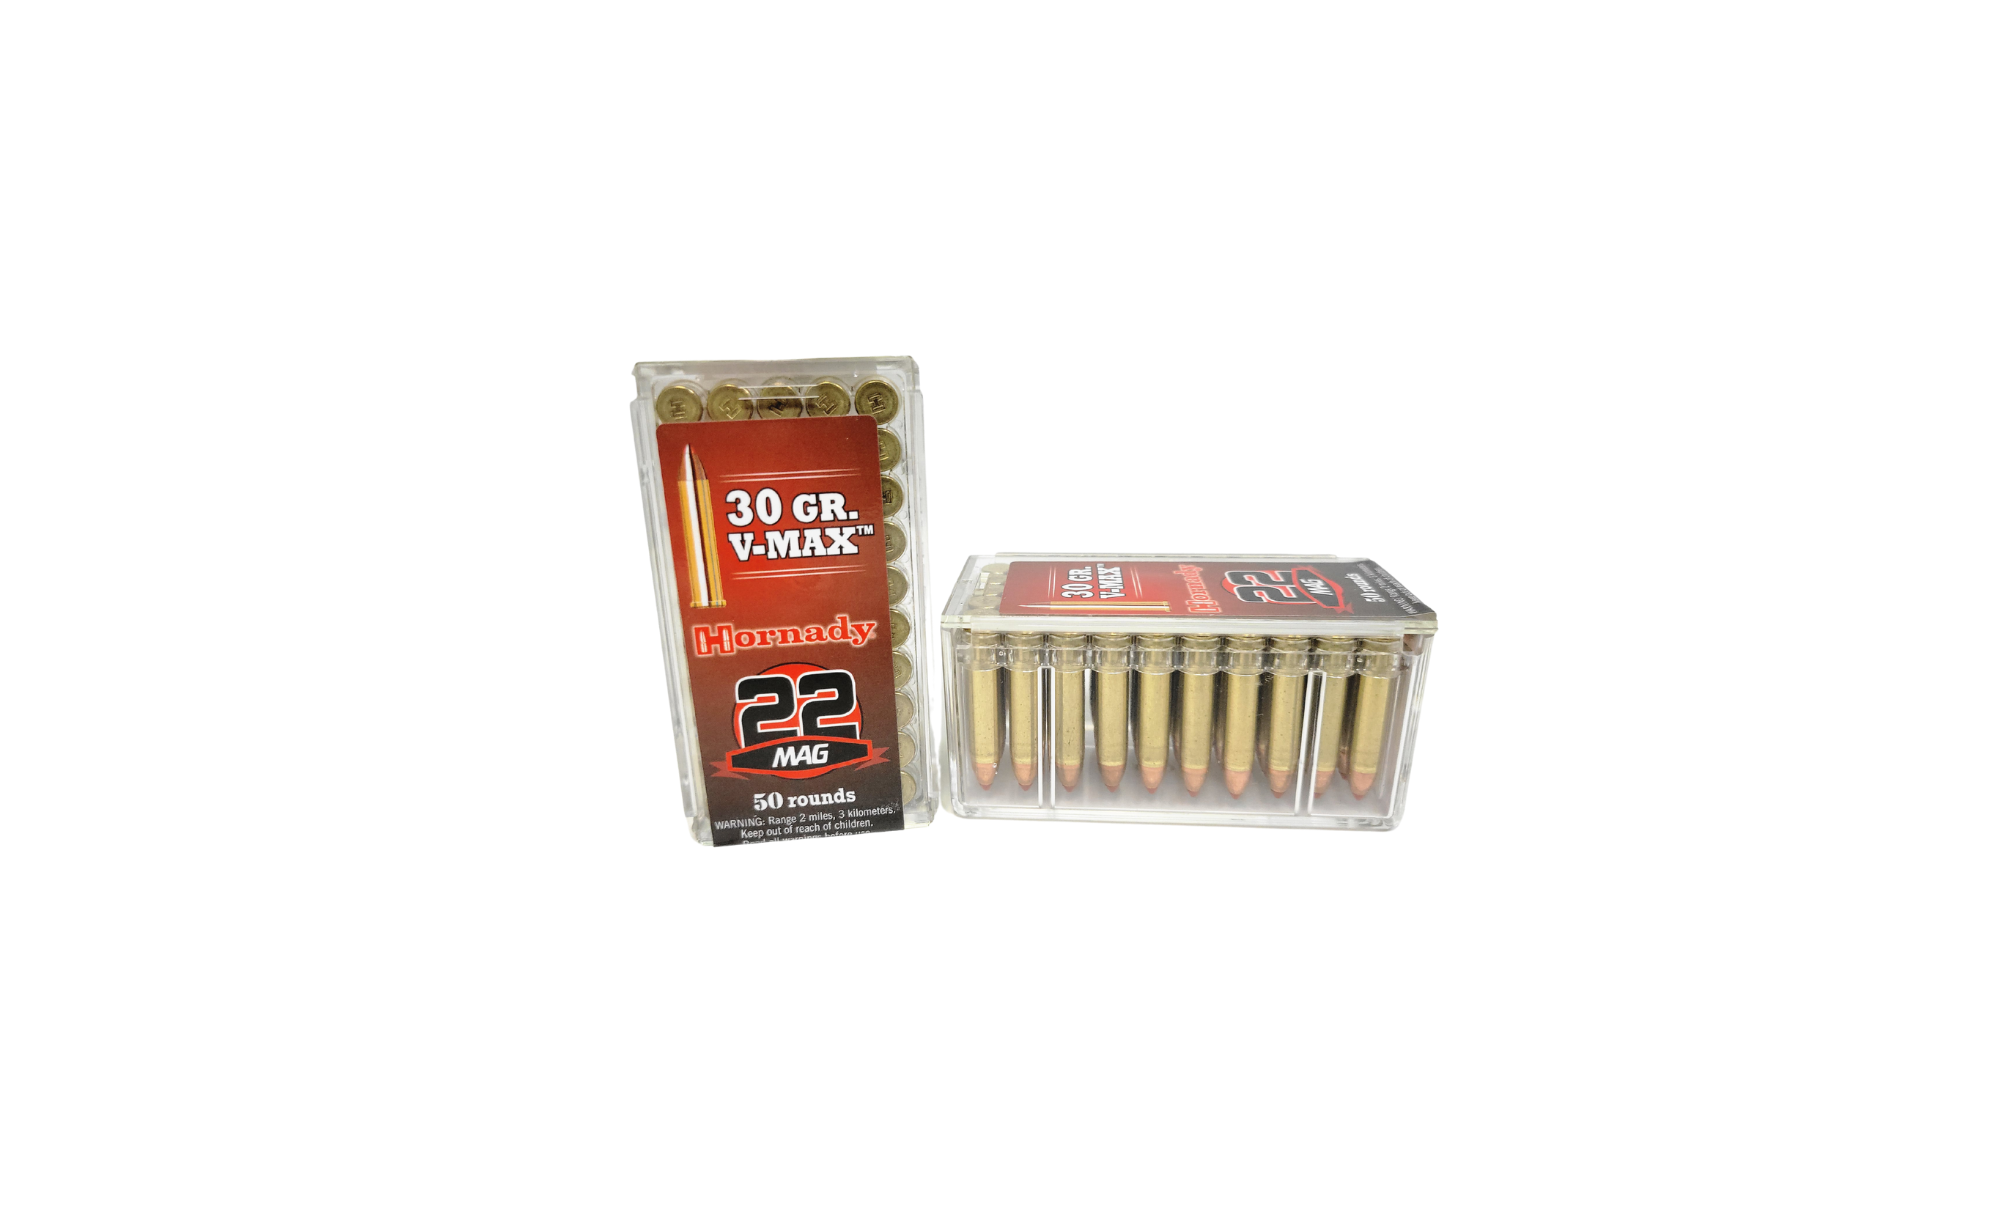 Hornady .22 Mag 30 Grain V-MAX - 50 Rounds (Box) [NO TAX outside Texas] FREE SHIPPING OVER $199